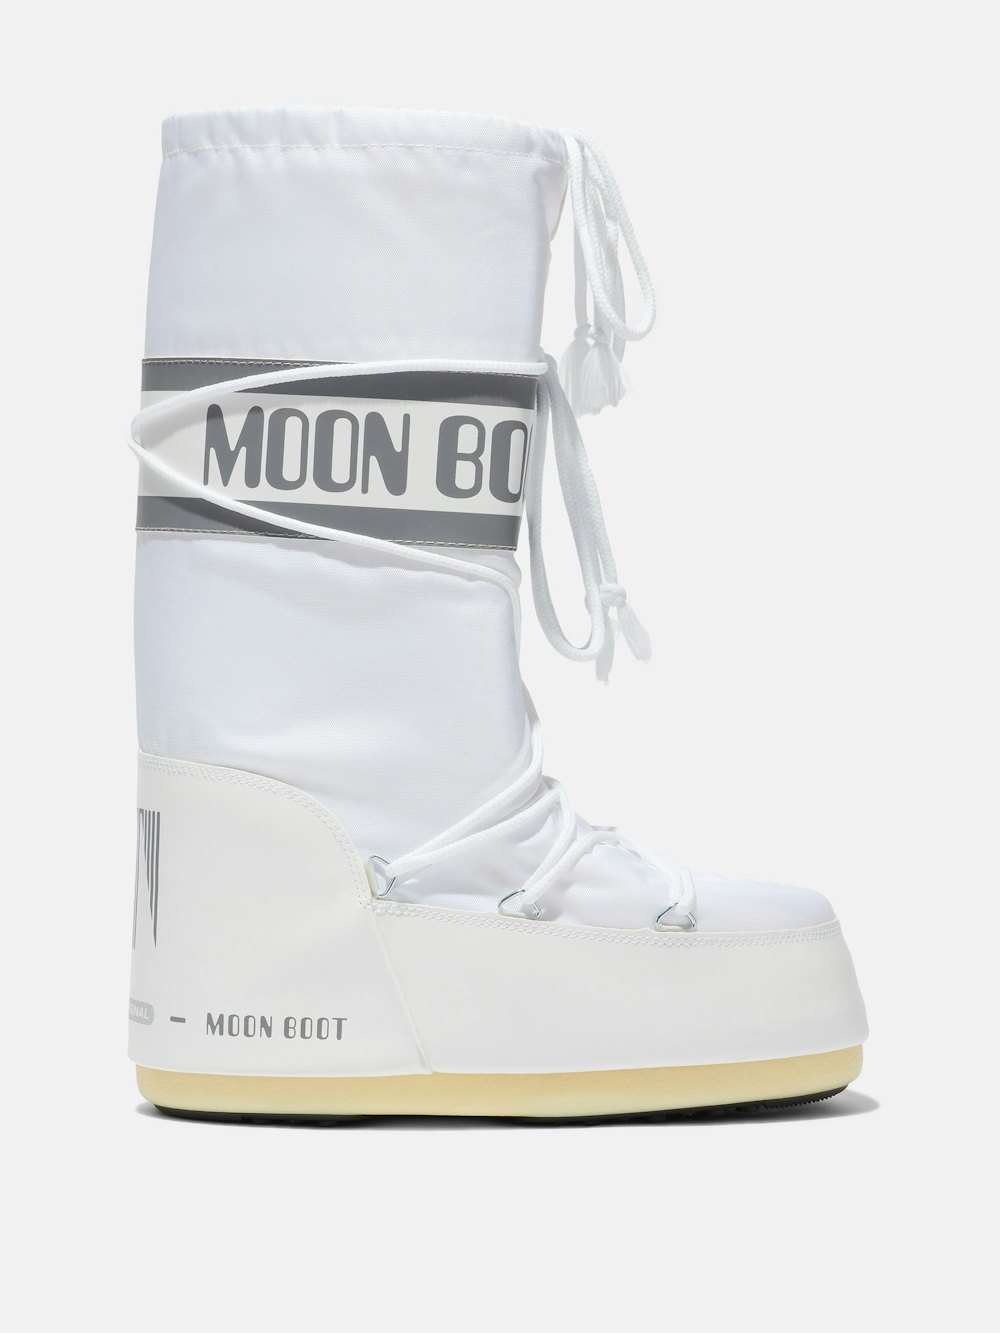 7 OUTFIT IDEAS WITH MOON BOOTS, WINTER'S “IT” ACCESSORY (NYLON) – Fashion  Magazine – Cometrend